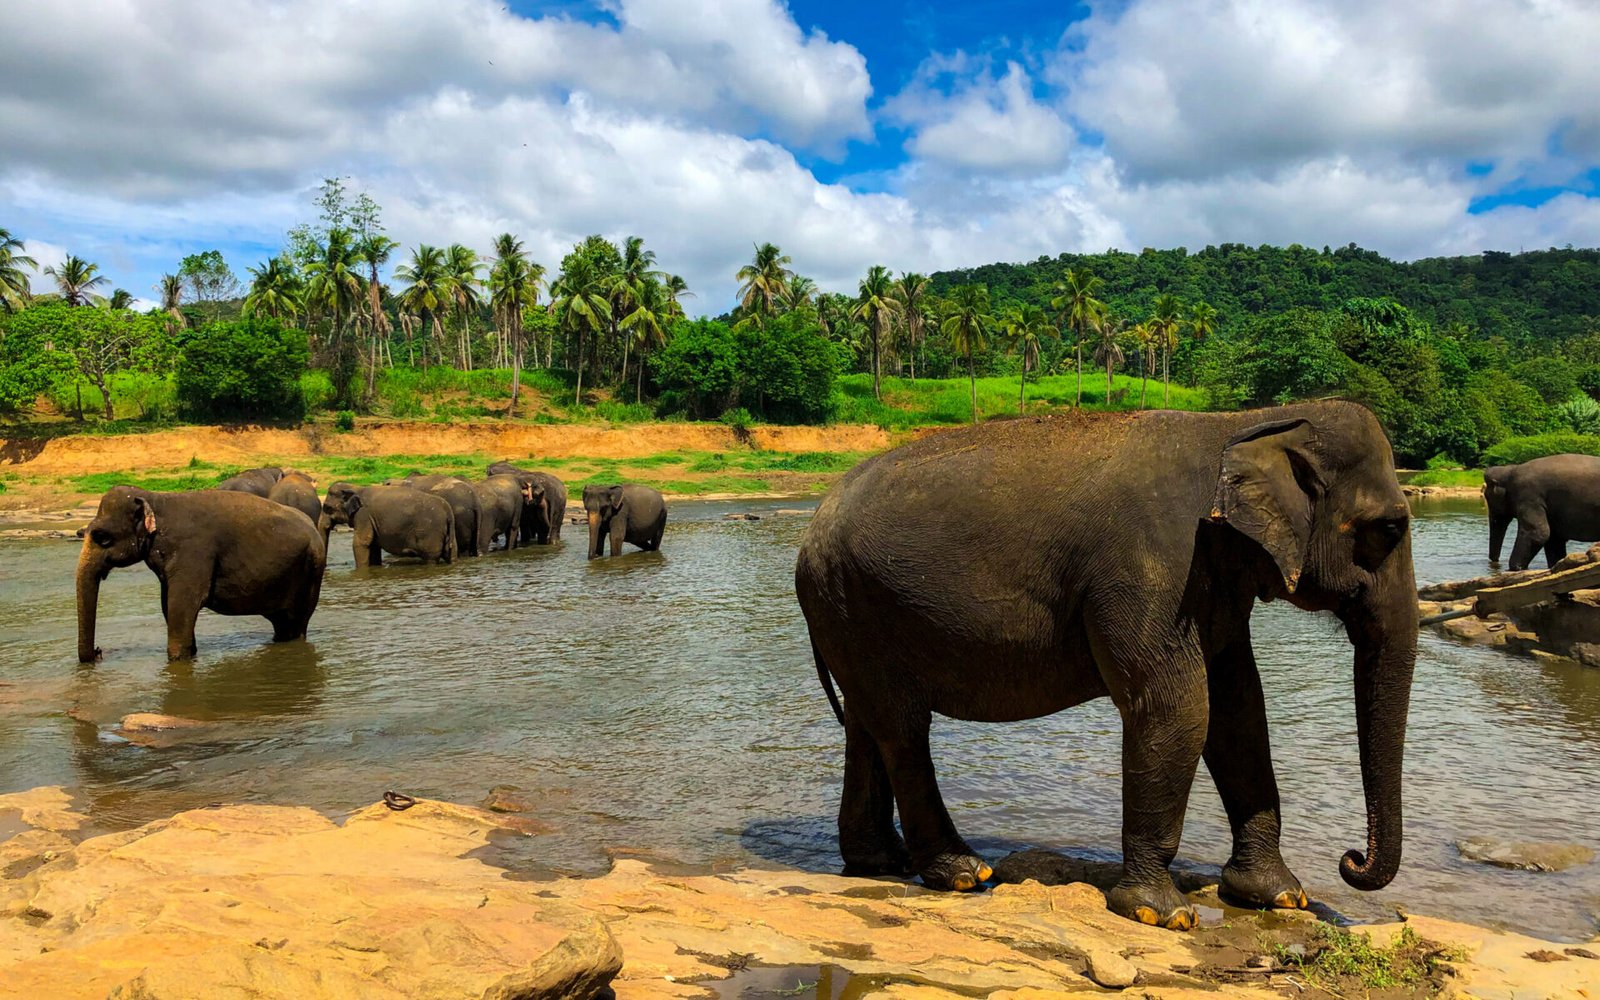 "A herd of elephants is seen walking in a shallow river that flows through the mountains."